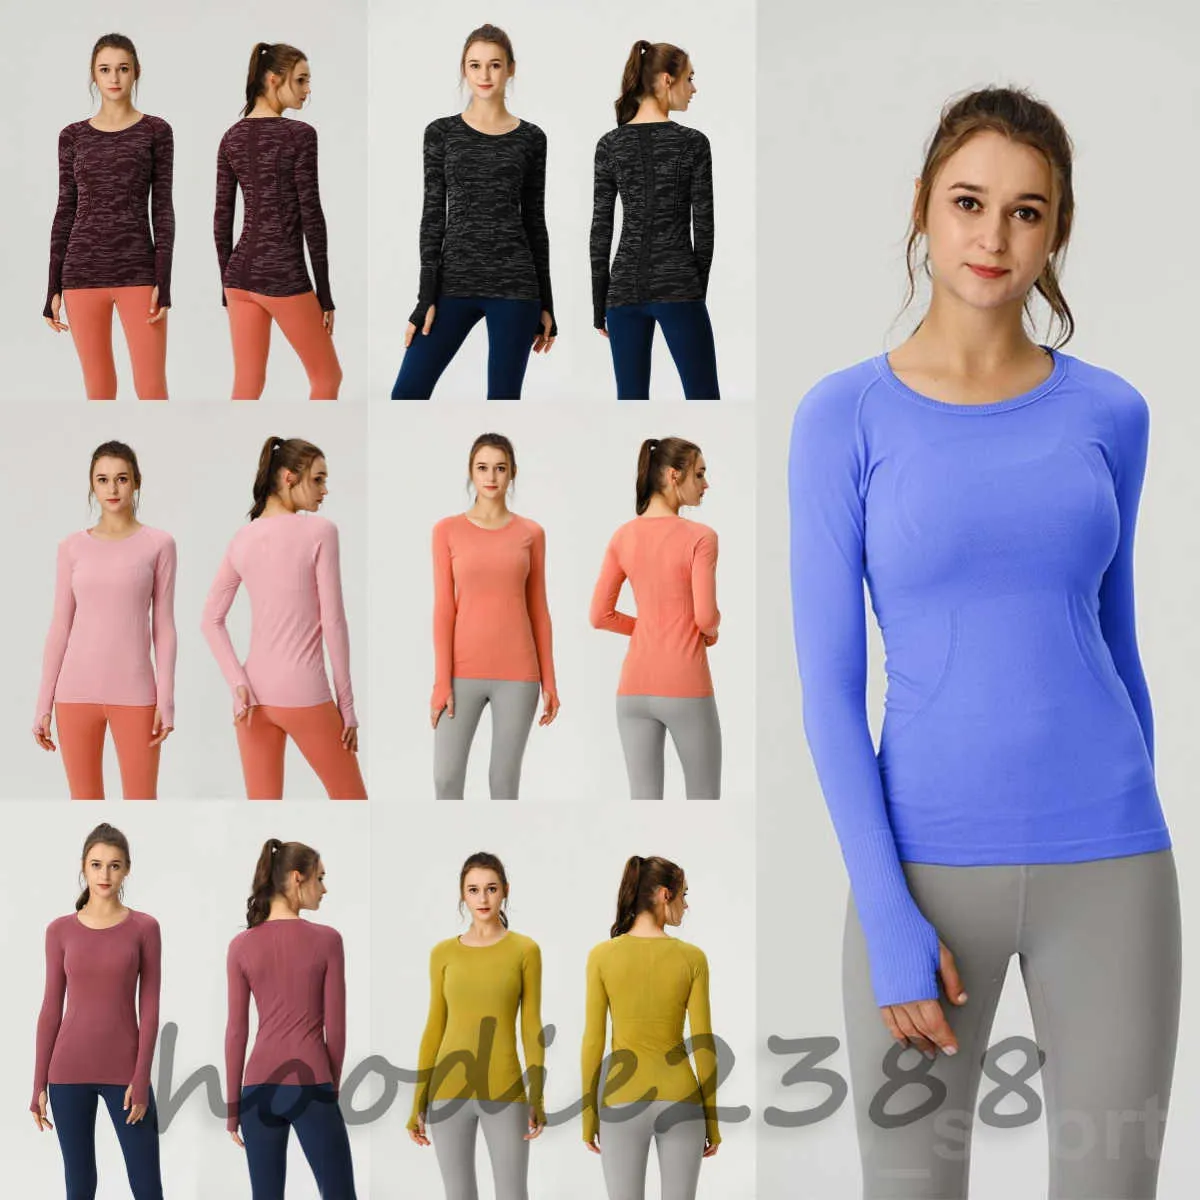 LuLu Align 2023 Long Sleeve Yoga Tight T Shirt For Women Slim Fit, Full  Stretch, Swiftly Tech, Ideal For Gym, Running, And Bodybuilding From  Hoodie2387, $26.64